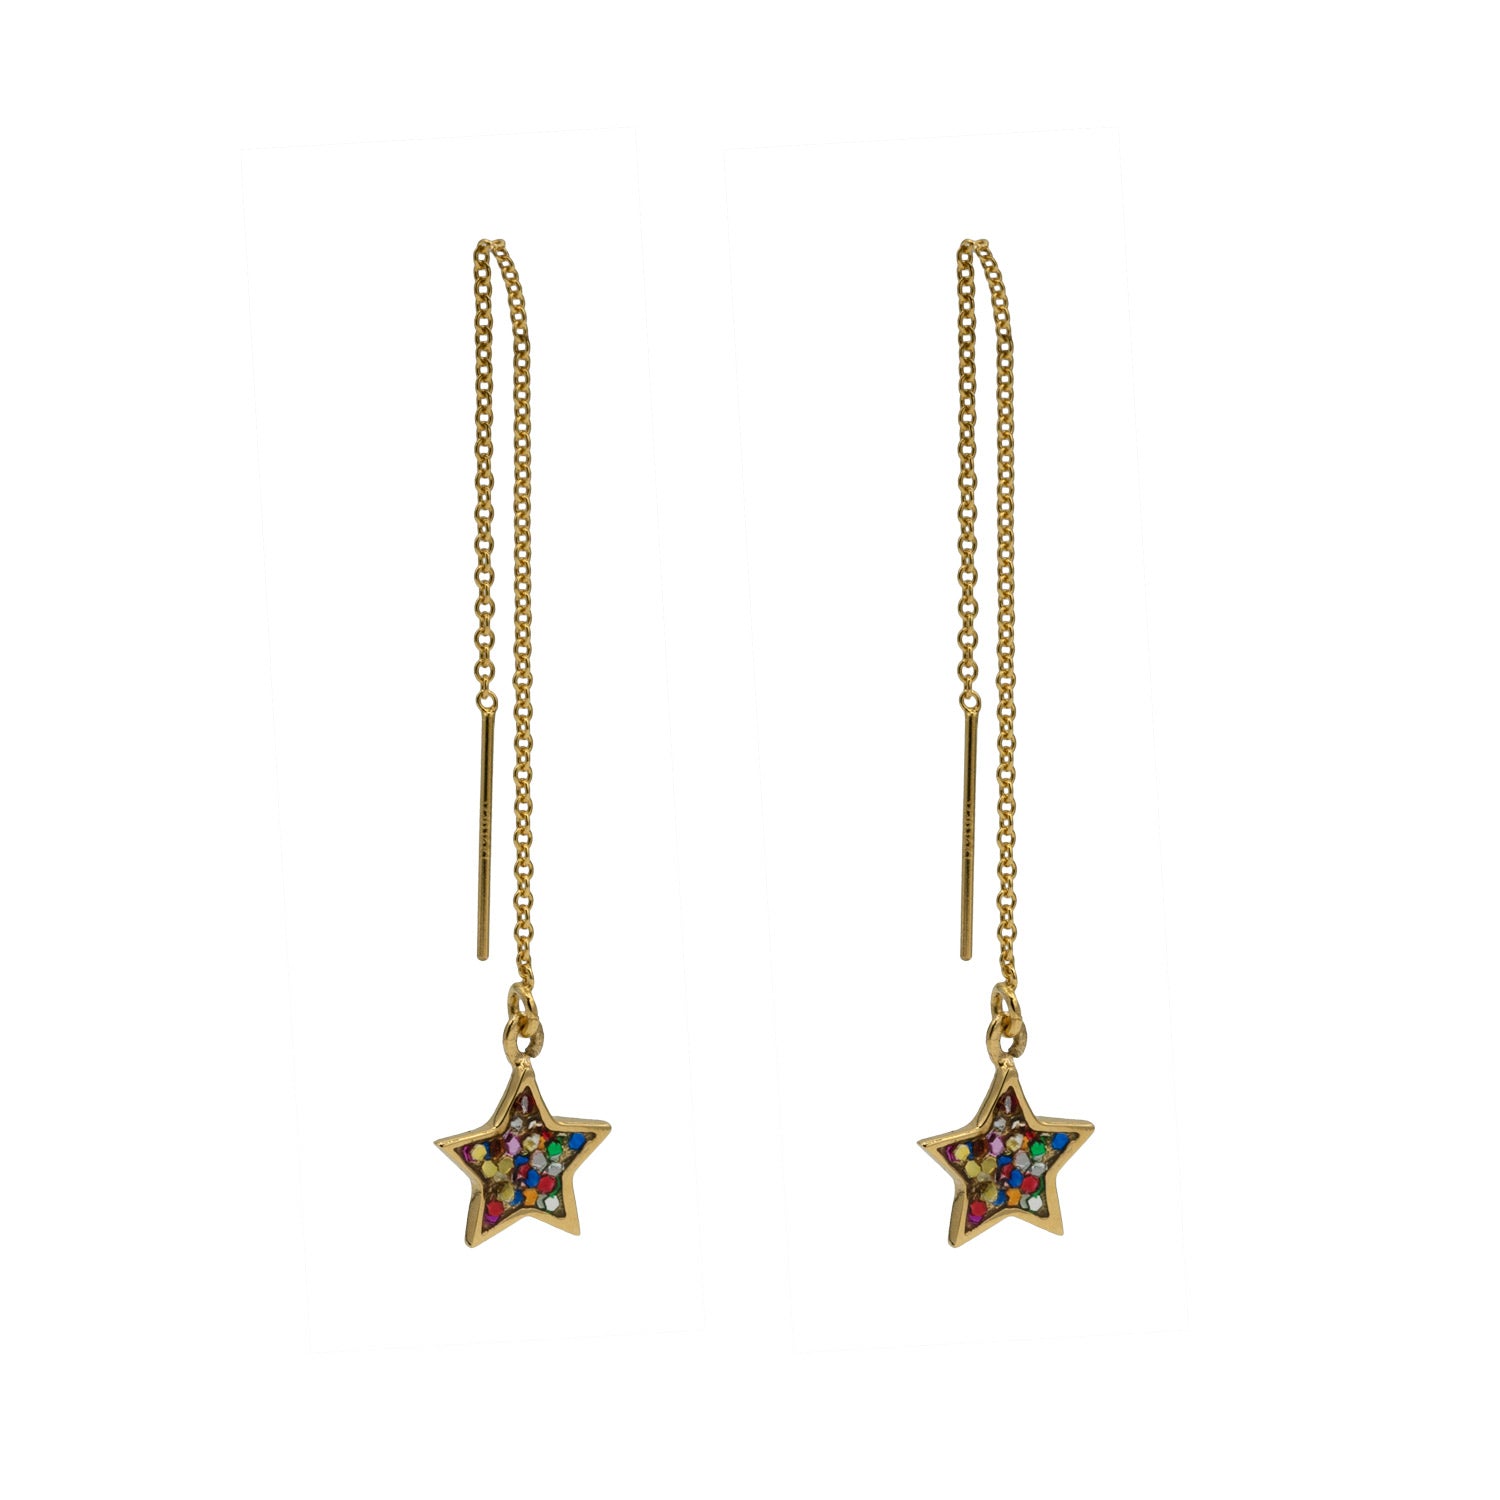 star ear threaders in gold filled with multiglitter